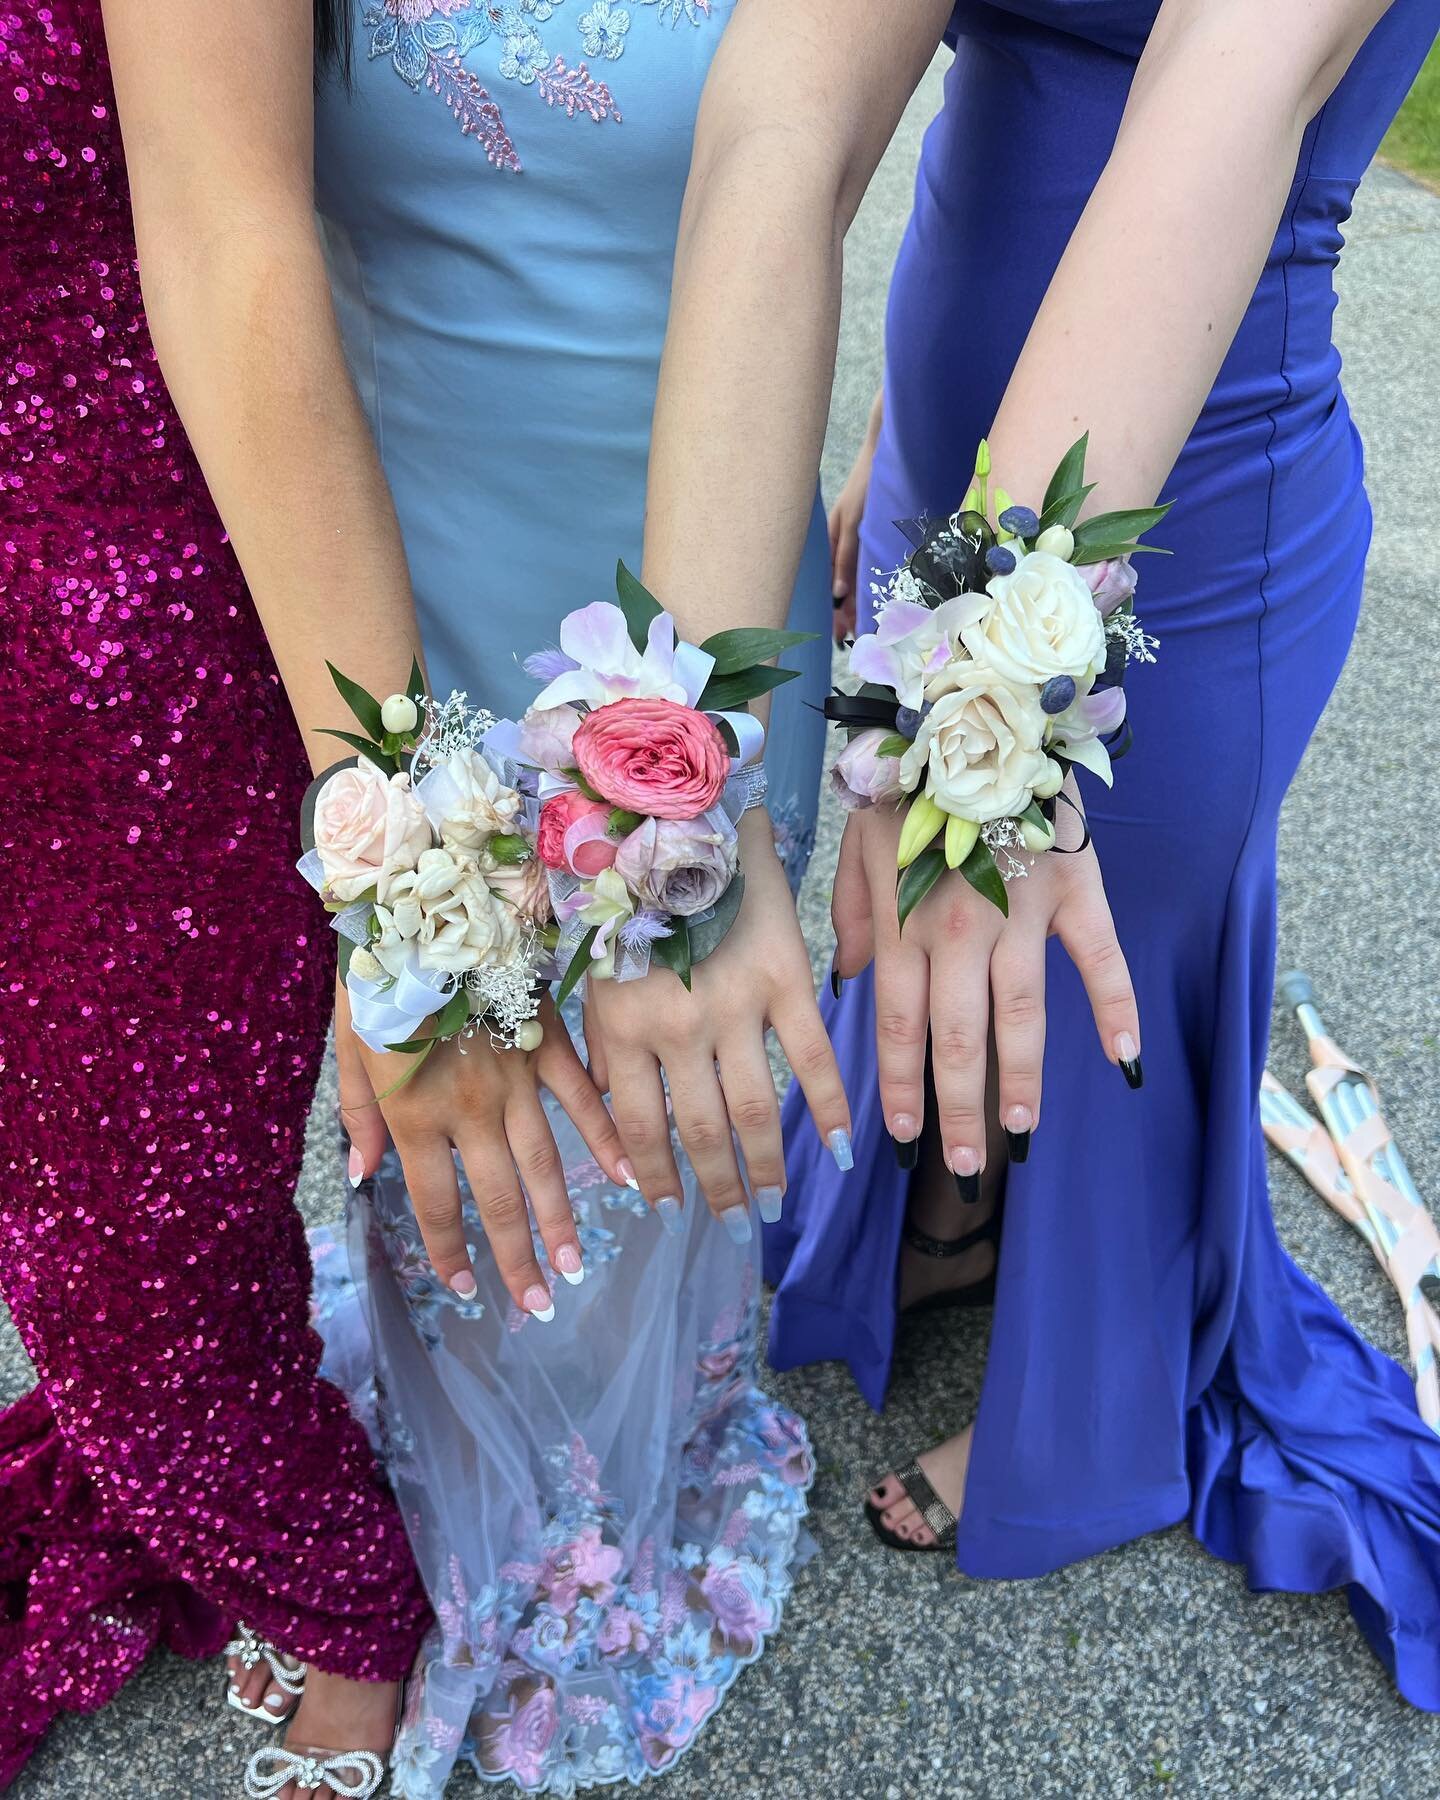 Got to do corsages &amp; boutonnieres for my niece and all her friends junior prom this week! Also doubled as the makeup artist 
&bull;
&bull;
&bull;
&bull;#florist #savvyflowers #weddingflorist #prom #promflowers #northshore #northshoreflorist